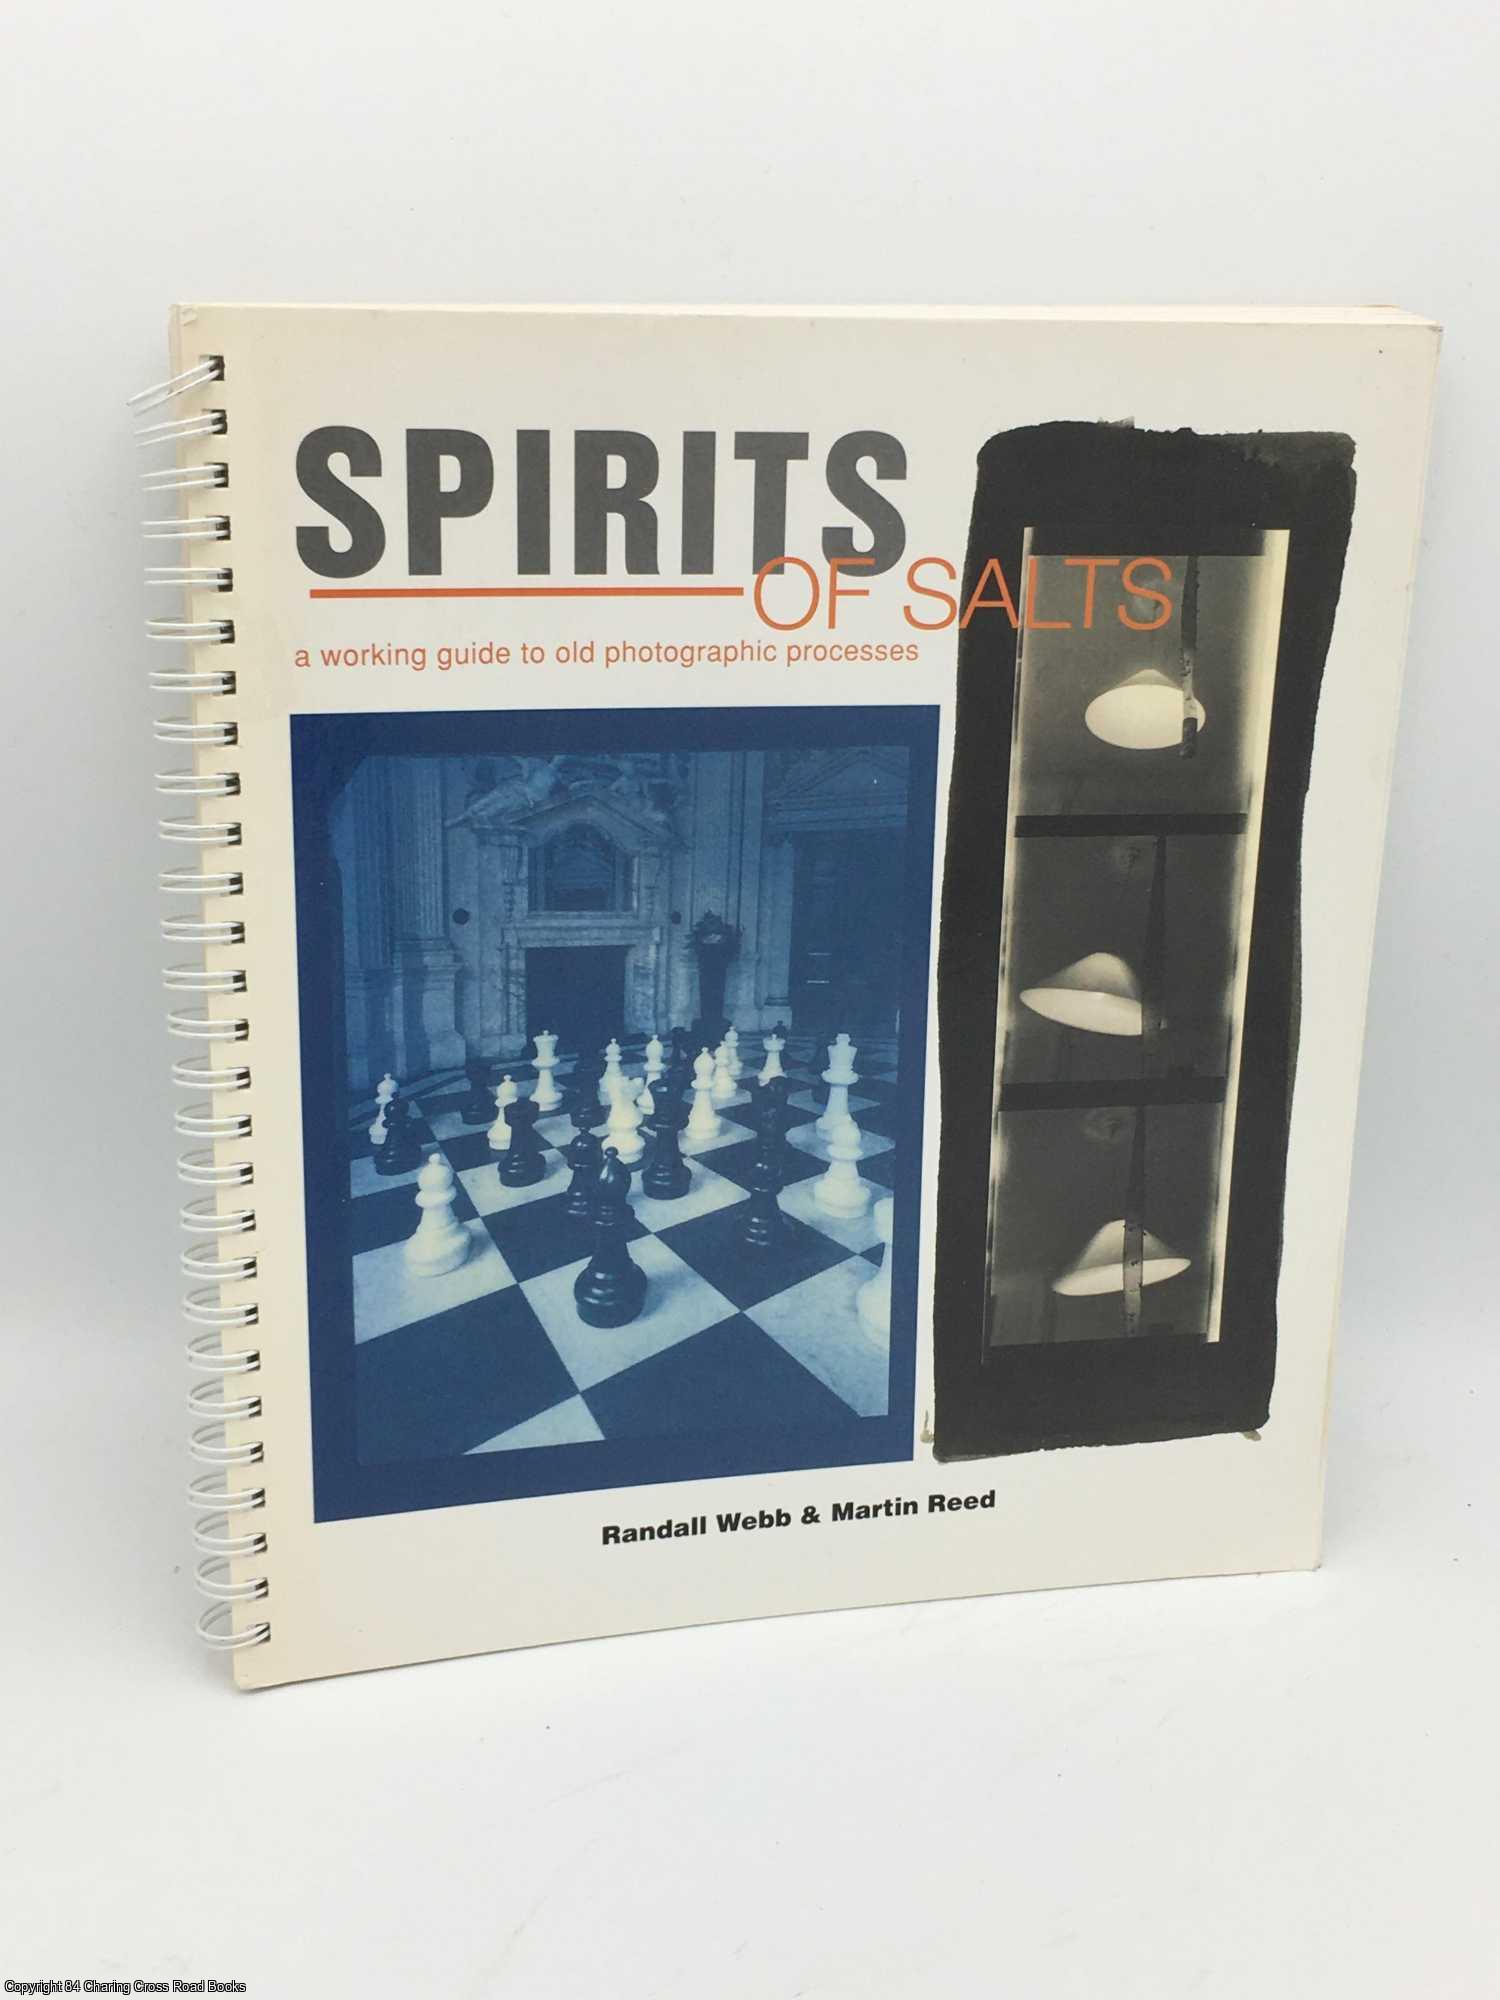 Webb, Randall - Spirits of Salts: Working Guide to Old Photographic Processes